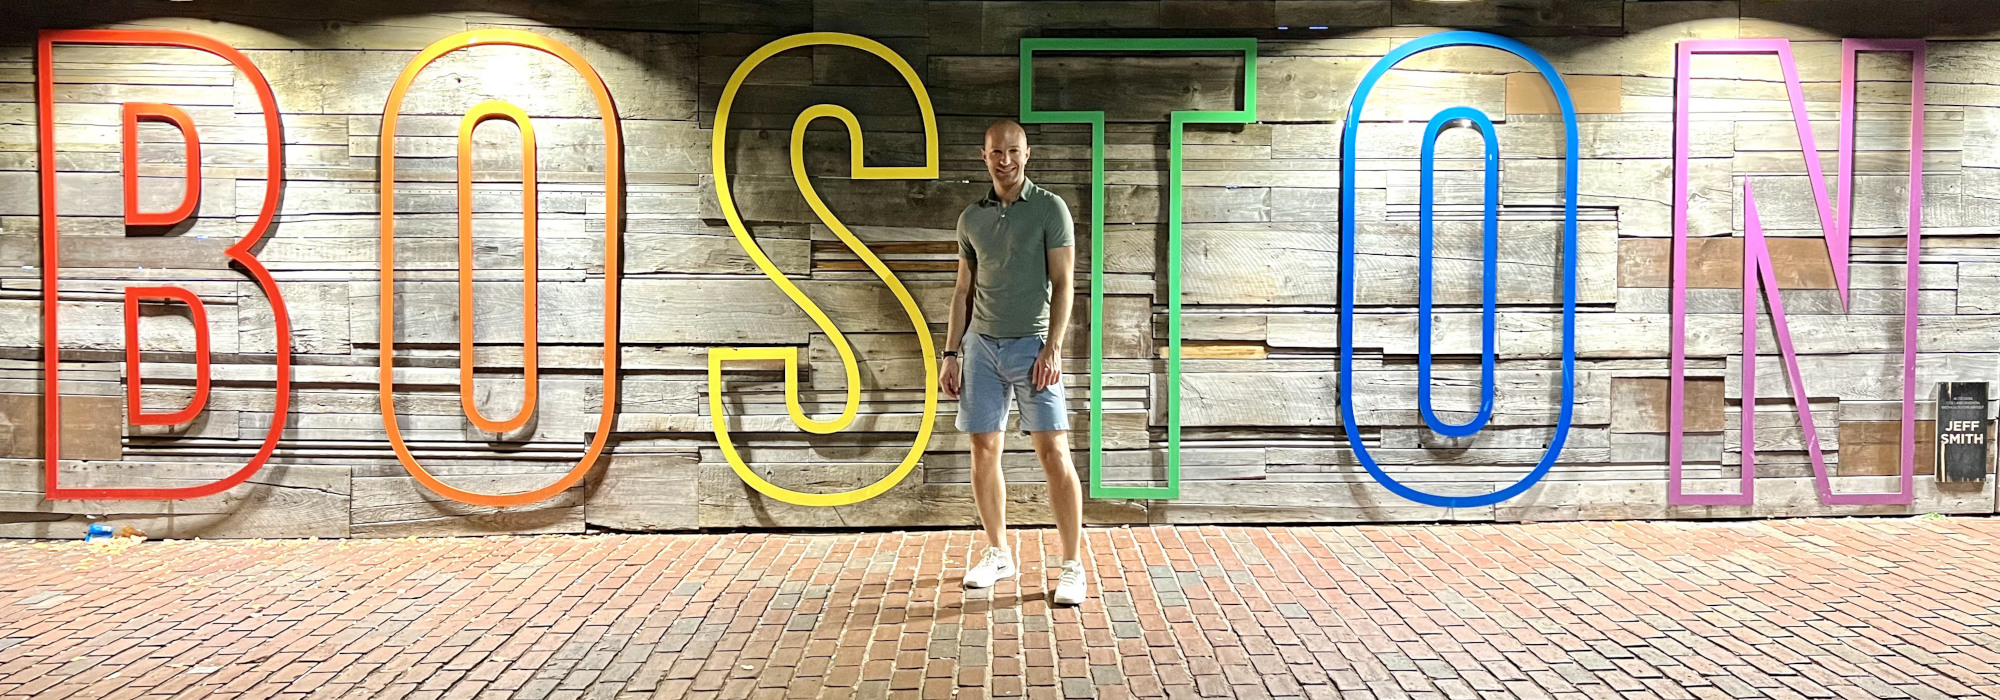 A photo of me standing in front of a textual art installation that says "Boston".